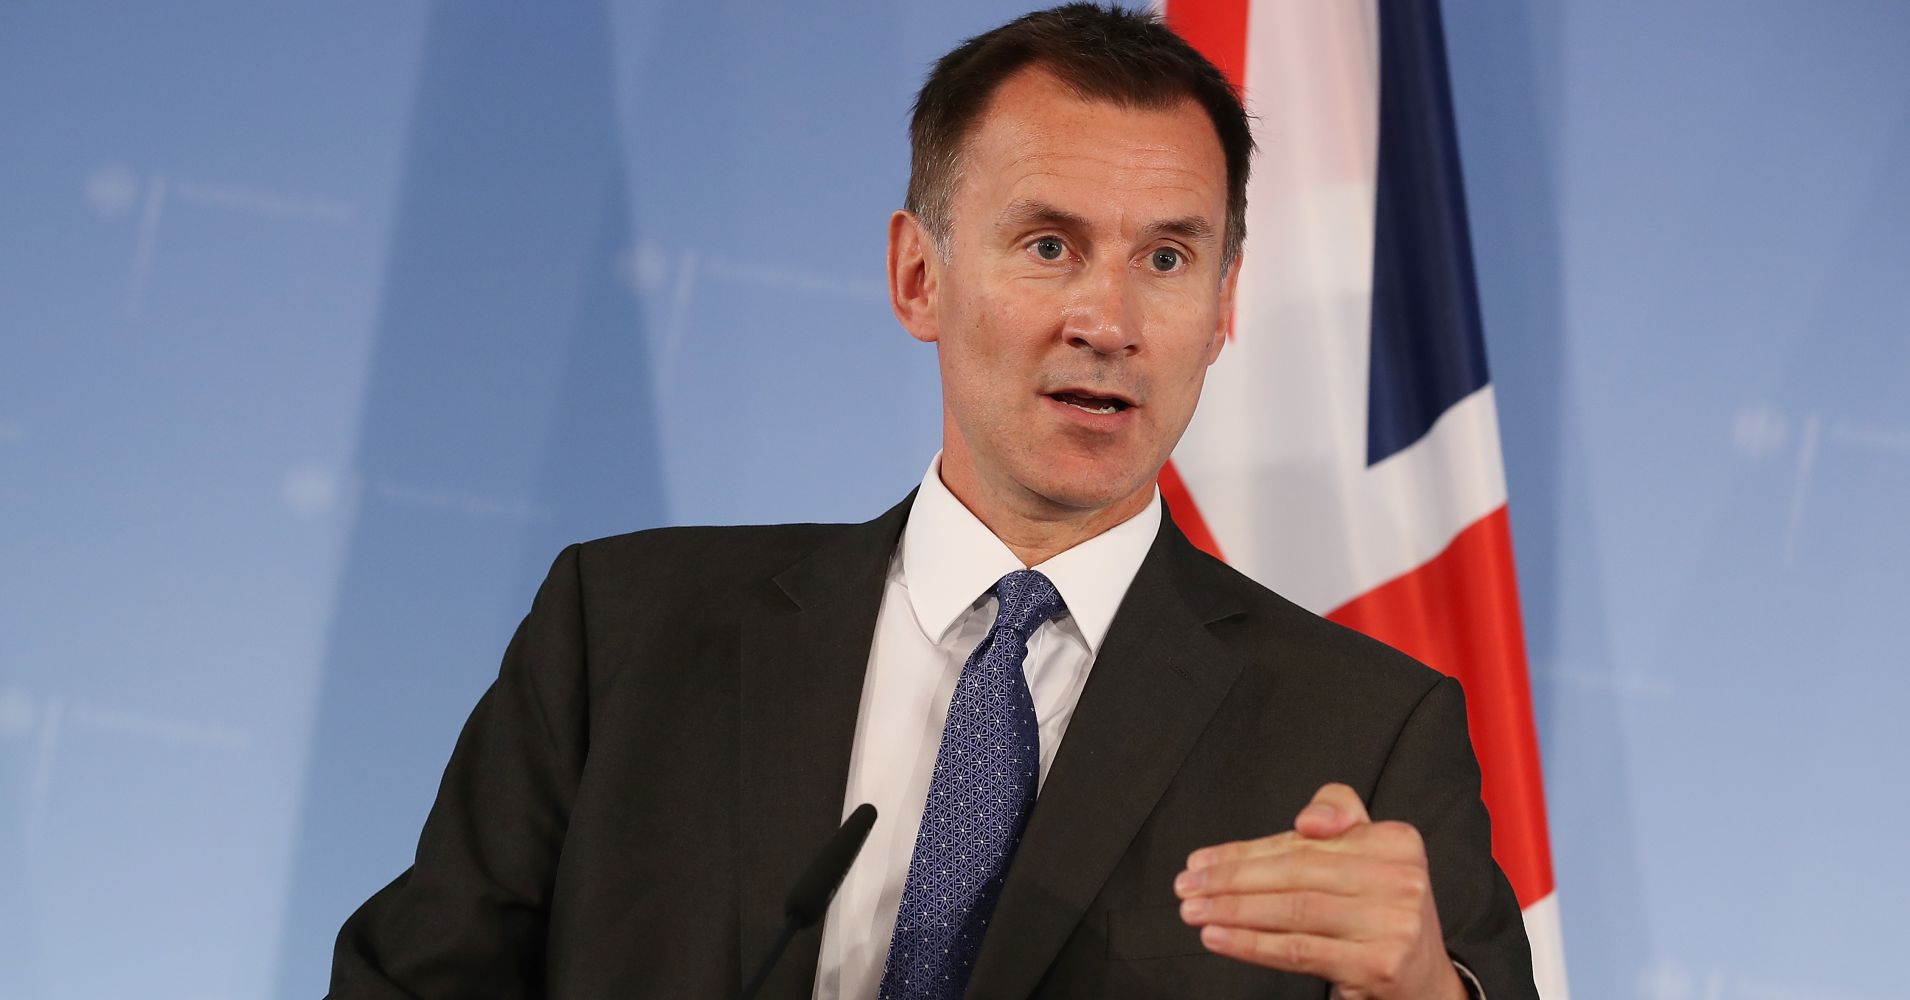 UK's new foreign minister in China for first overseas visit